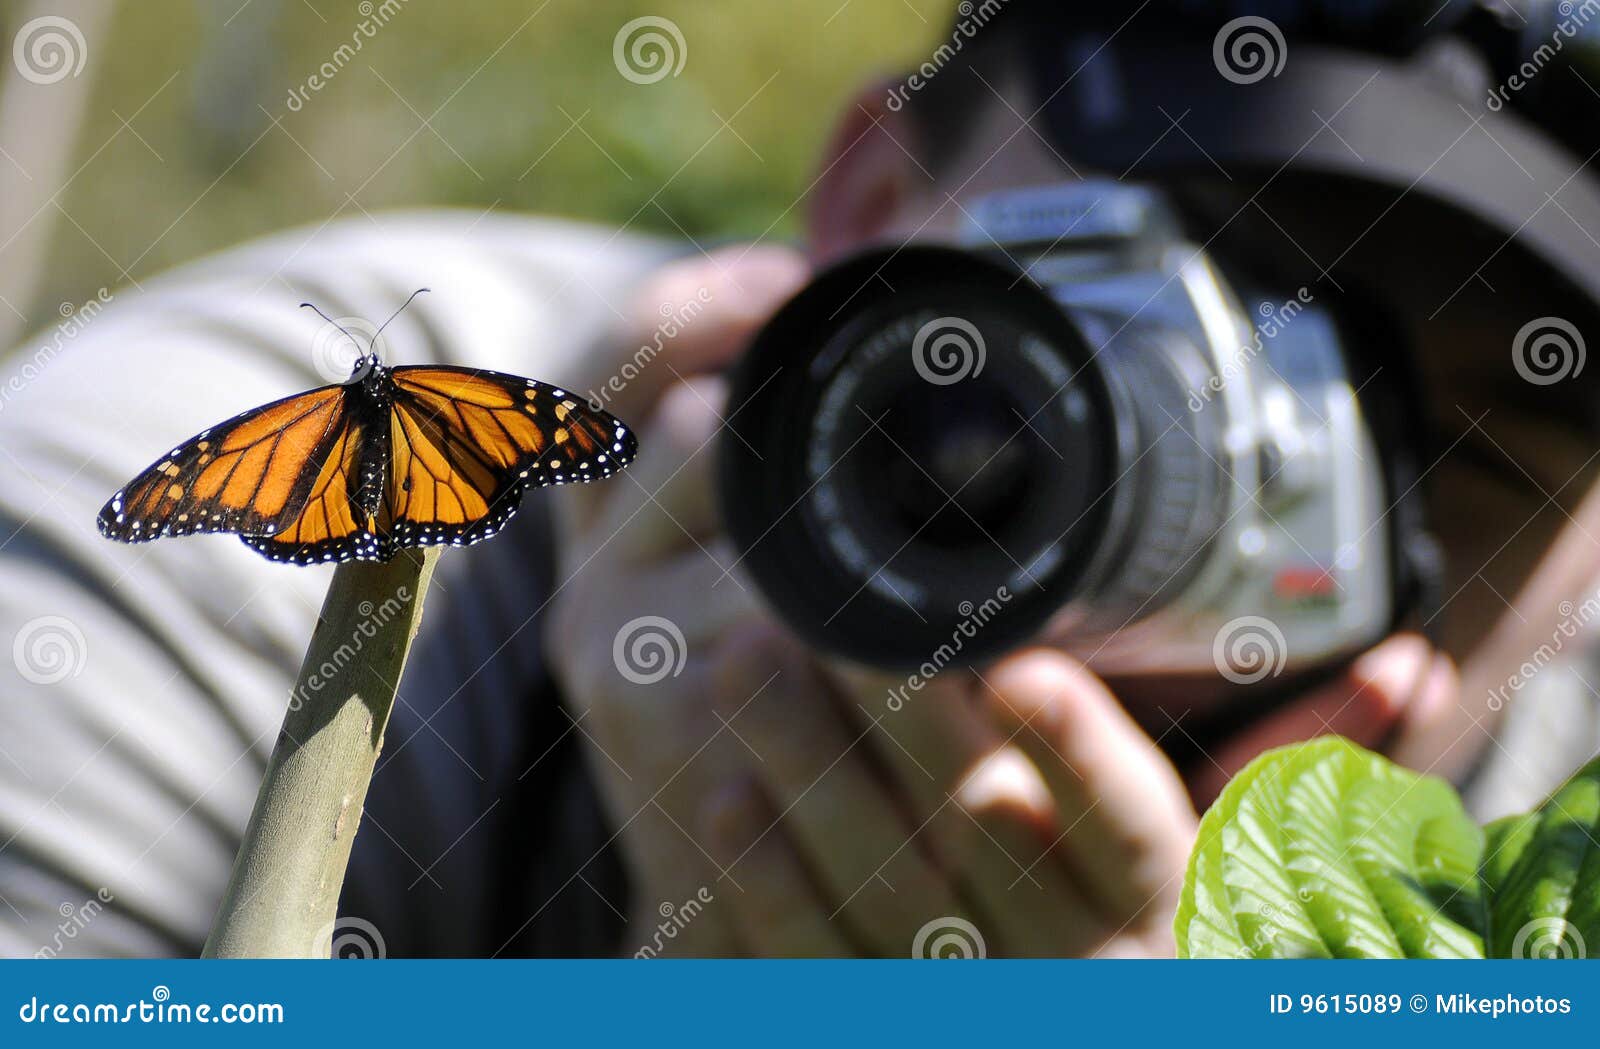 photographer and butterfly